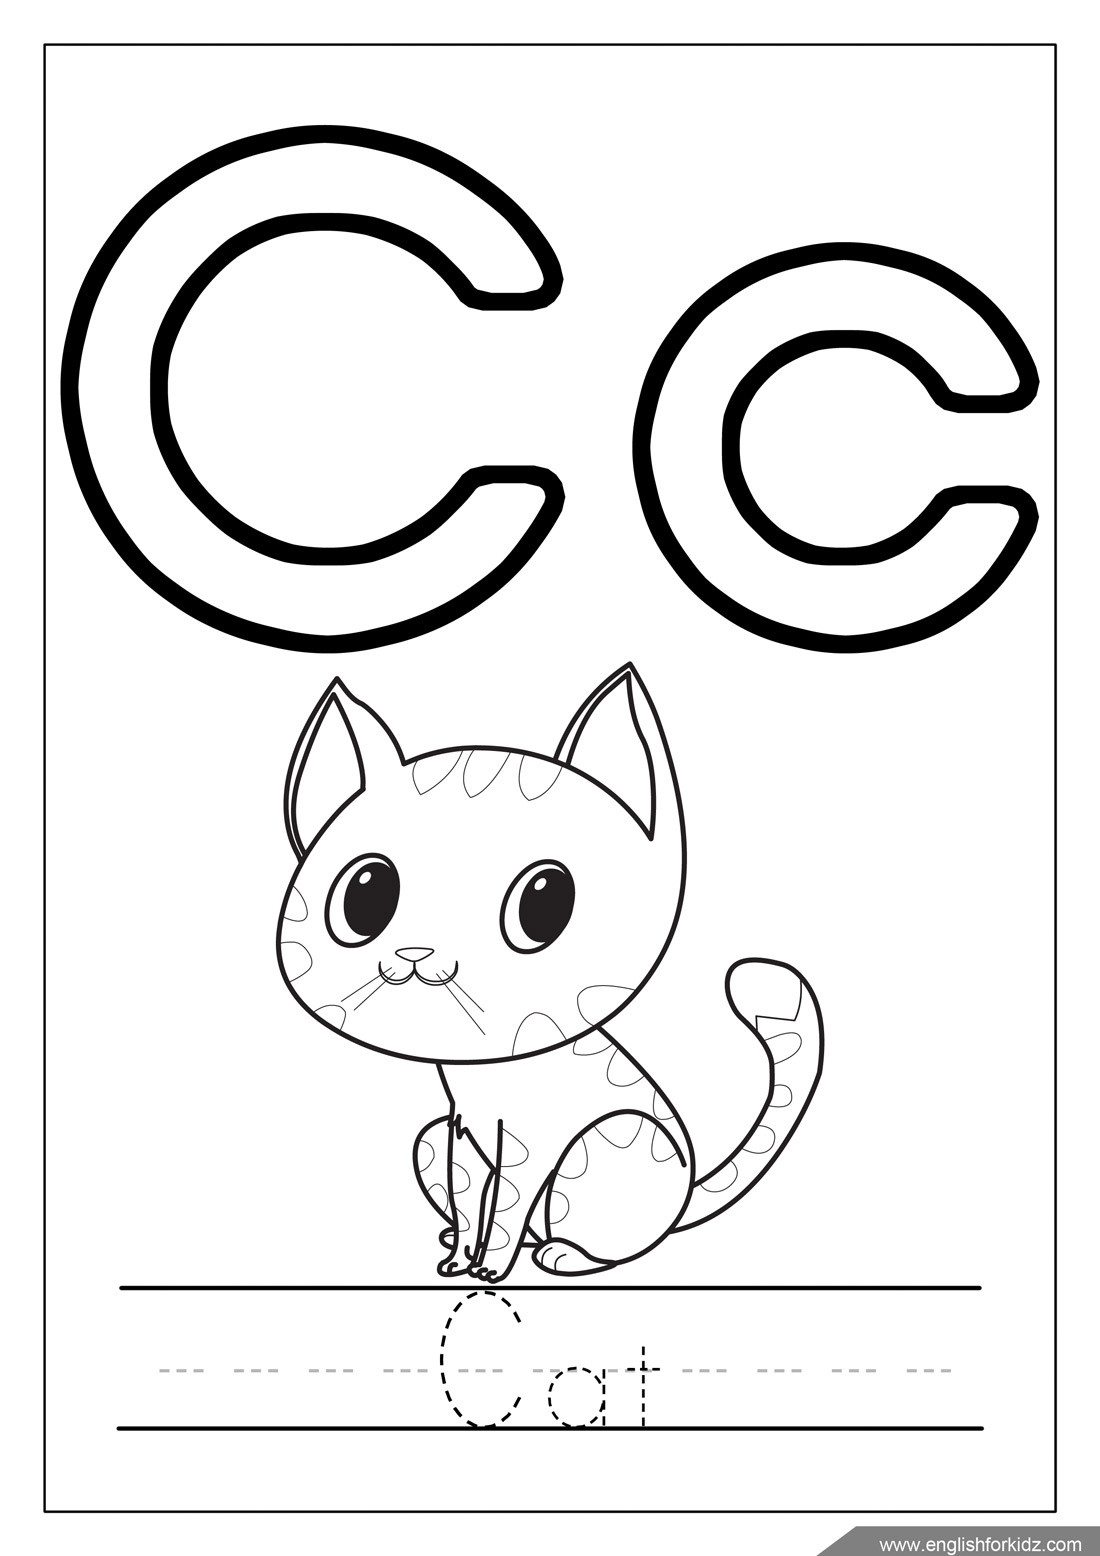 Letter I Coloring Pages
 Printable Alphabet Coloring Pages Letters A J